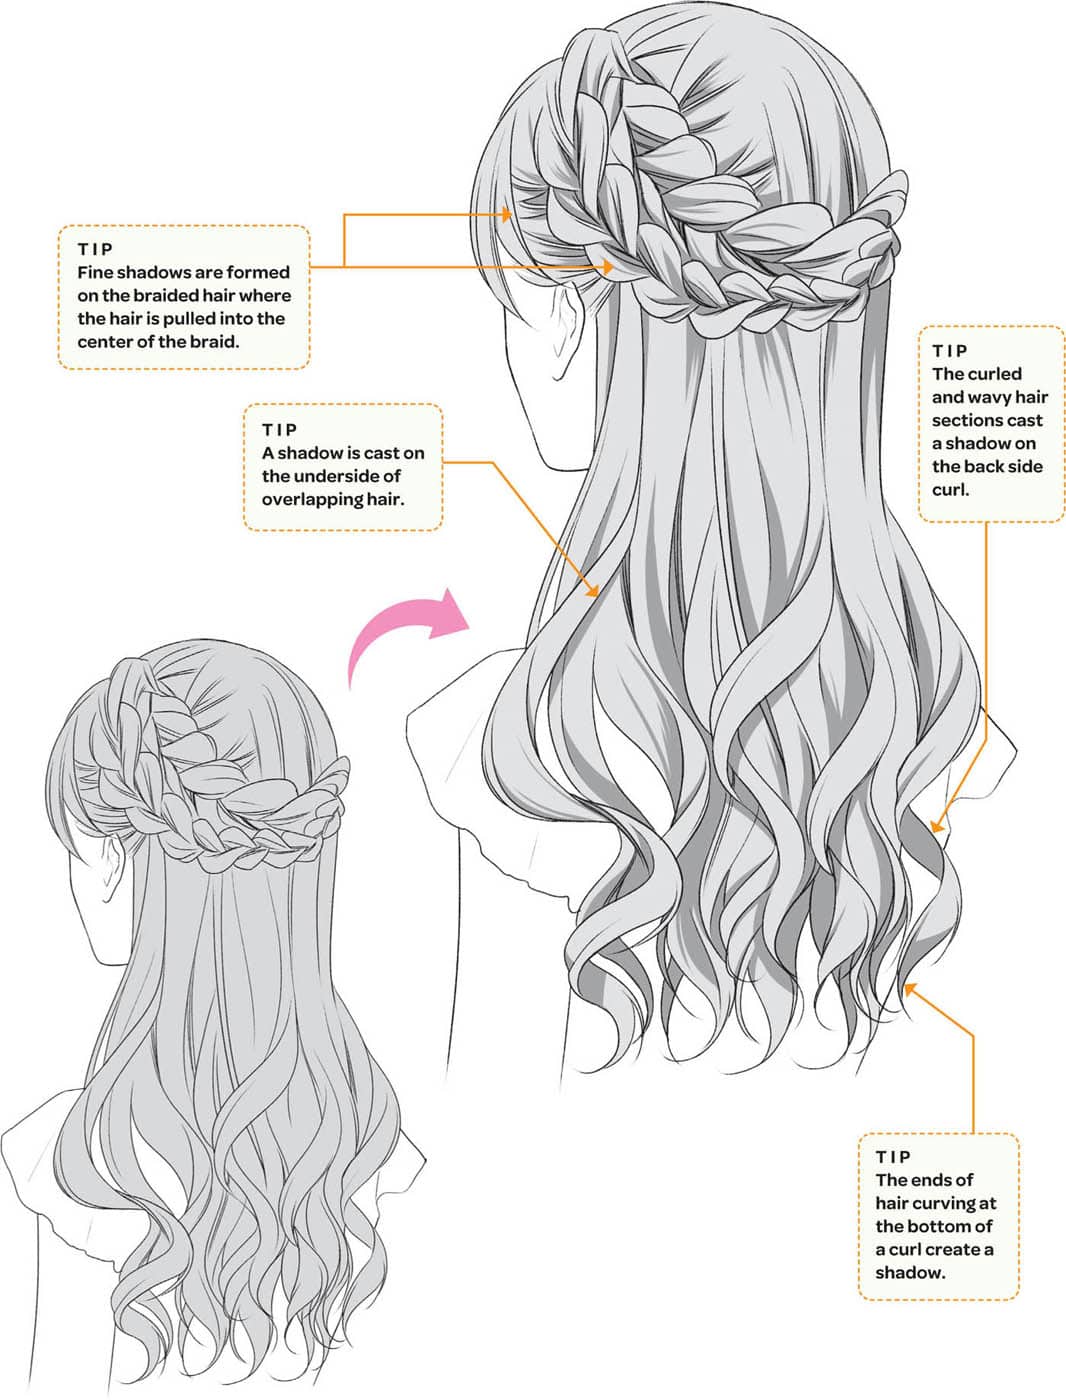 TIP Fine shadows are formed on the braided hair where the hair is pulled into the center of the braid. TIP A shadow is cast on the underside of overlapping hair. TIP The curled and wavy hair sections cast a shadow on the back side curl. TIP The ends of hair curving at the bottom of a curl create a shadow.